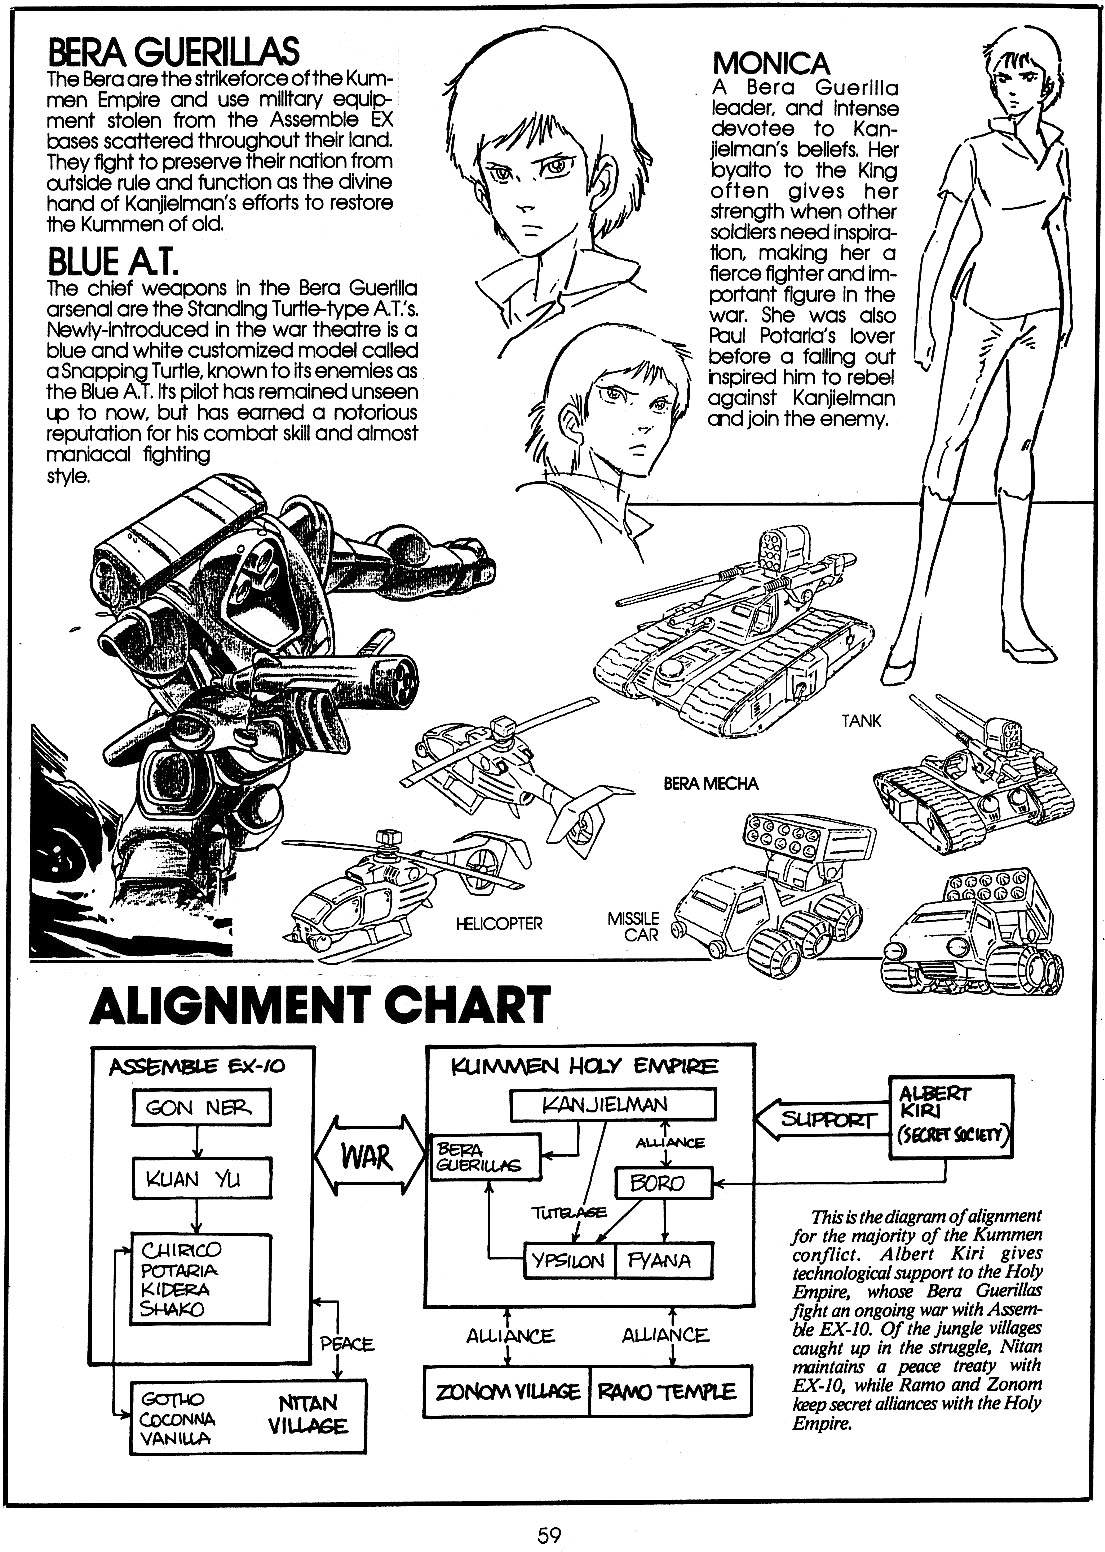 VOTOMS Viewing Guide 60